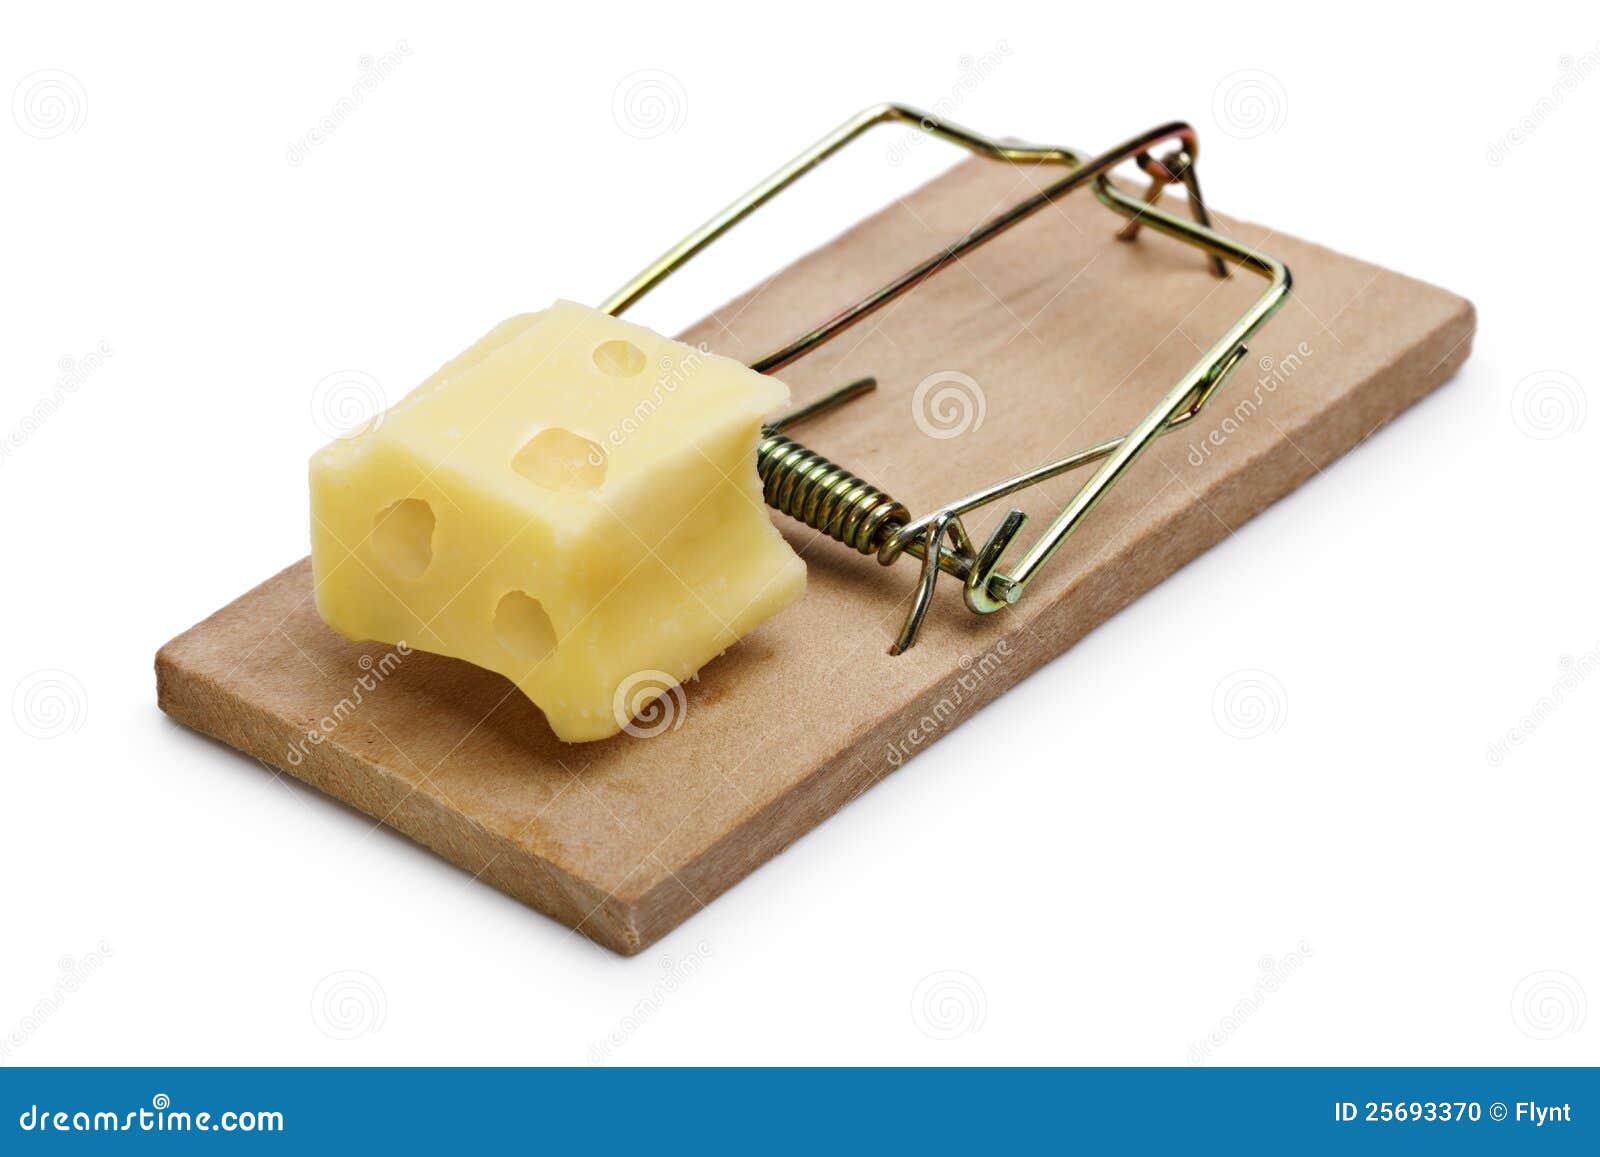 Mousetrap baited with cheese concept for risk, incentive and 